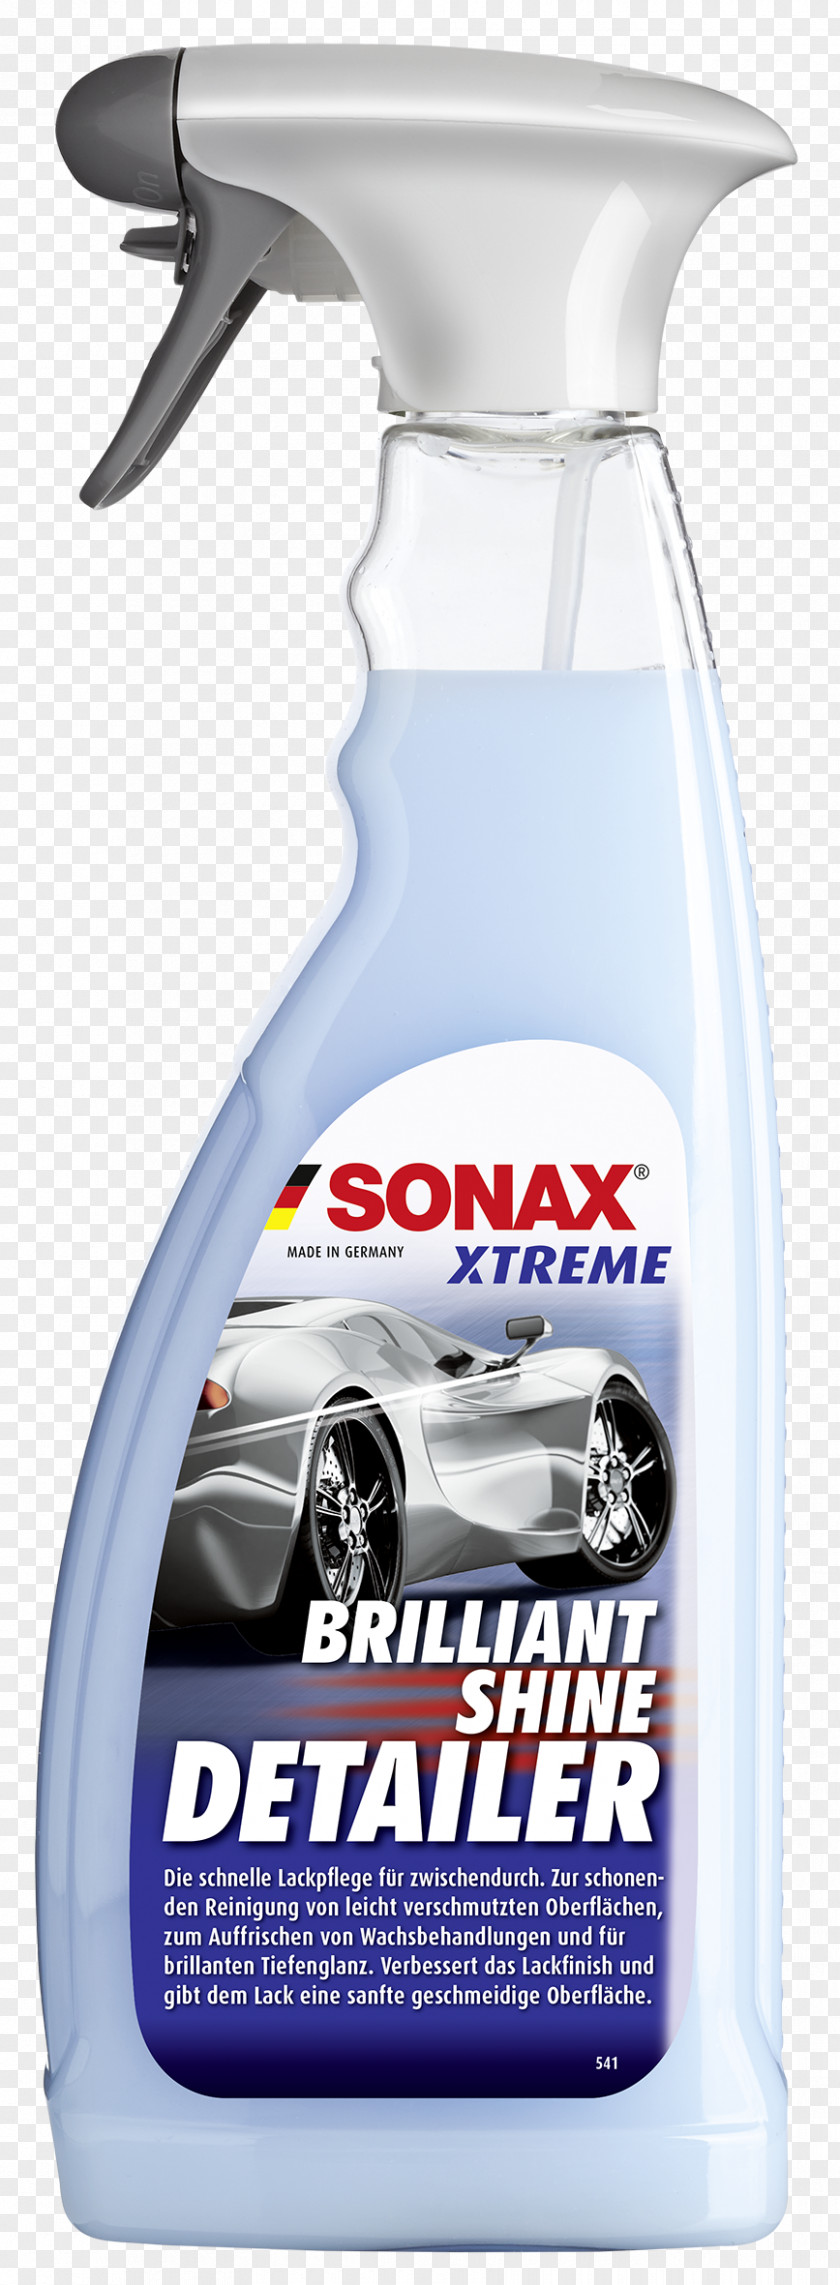 Car Sonax Wax Cleaning Amazon.com PNG